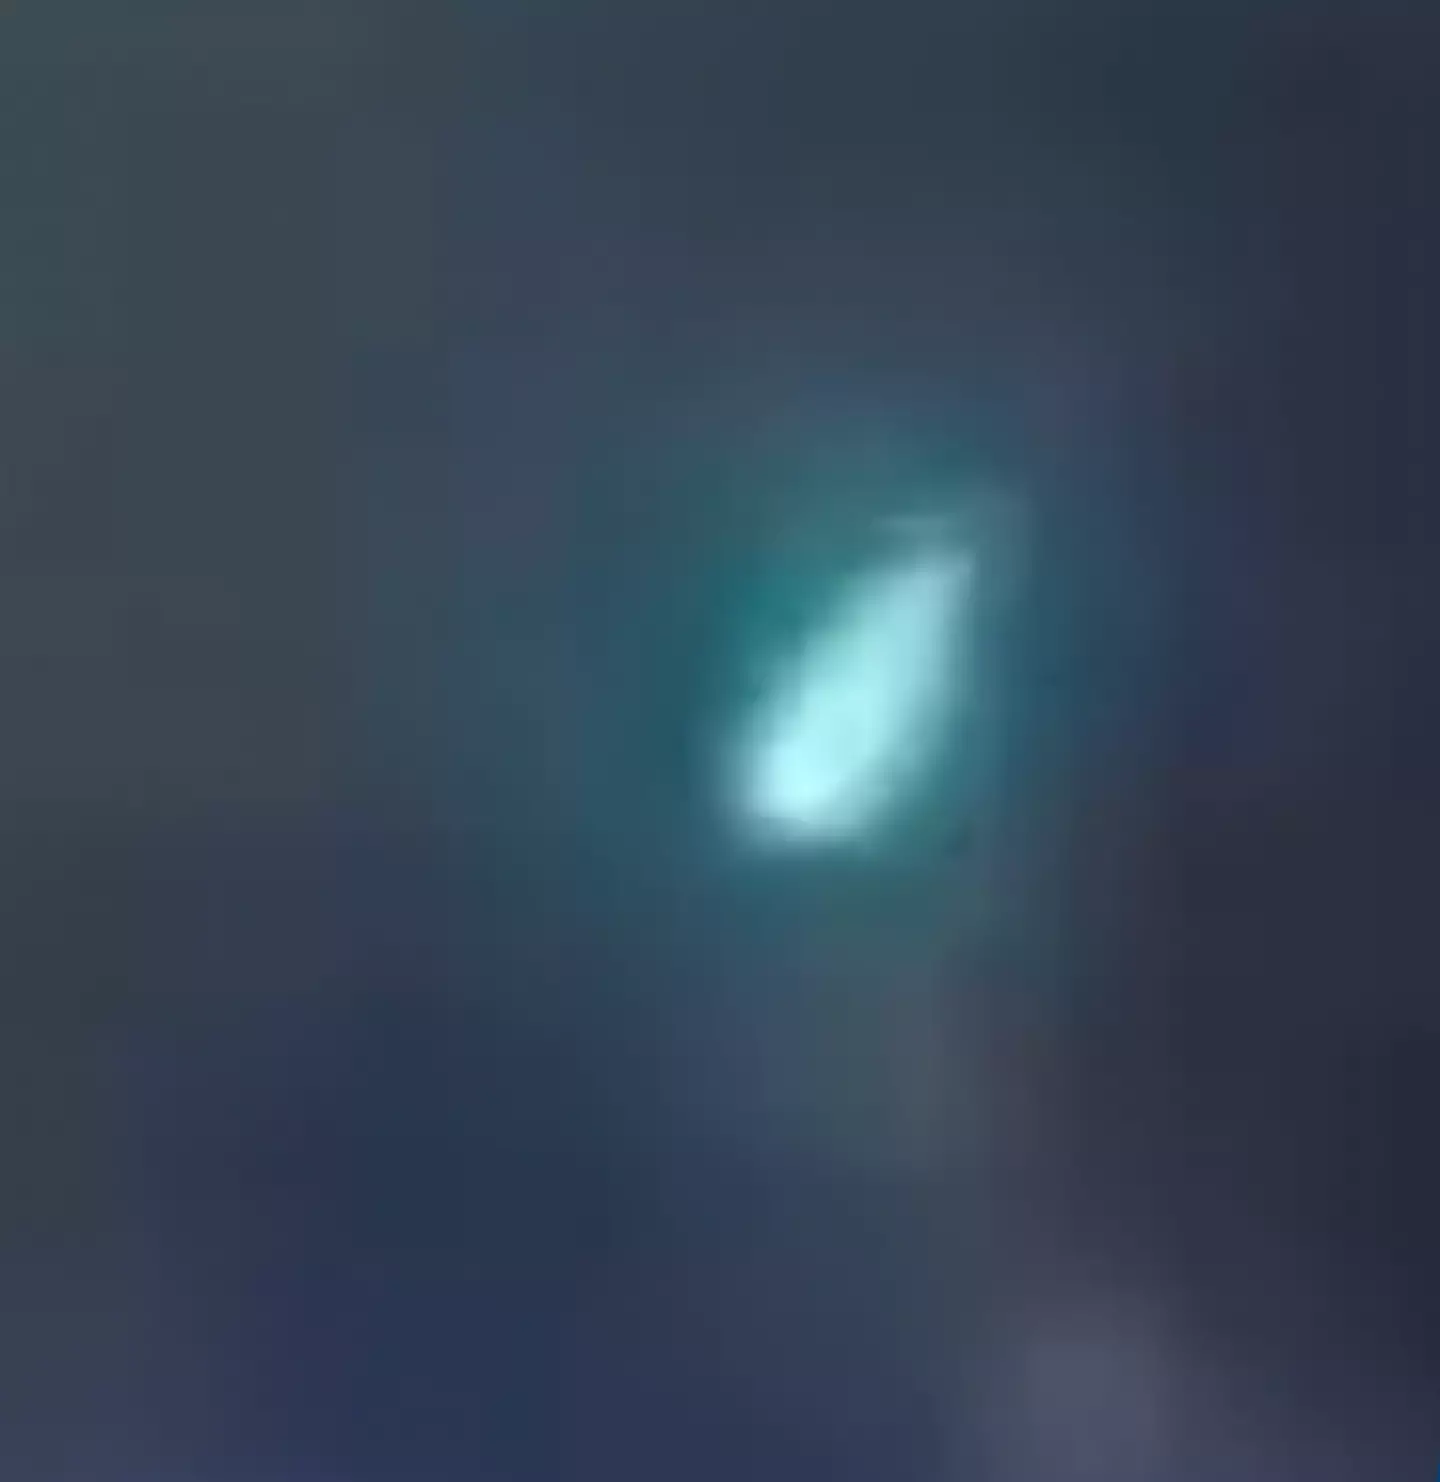 The footage has seemingly captured a UFO sighting.